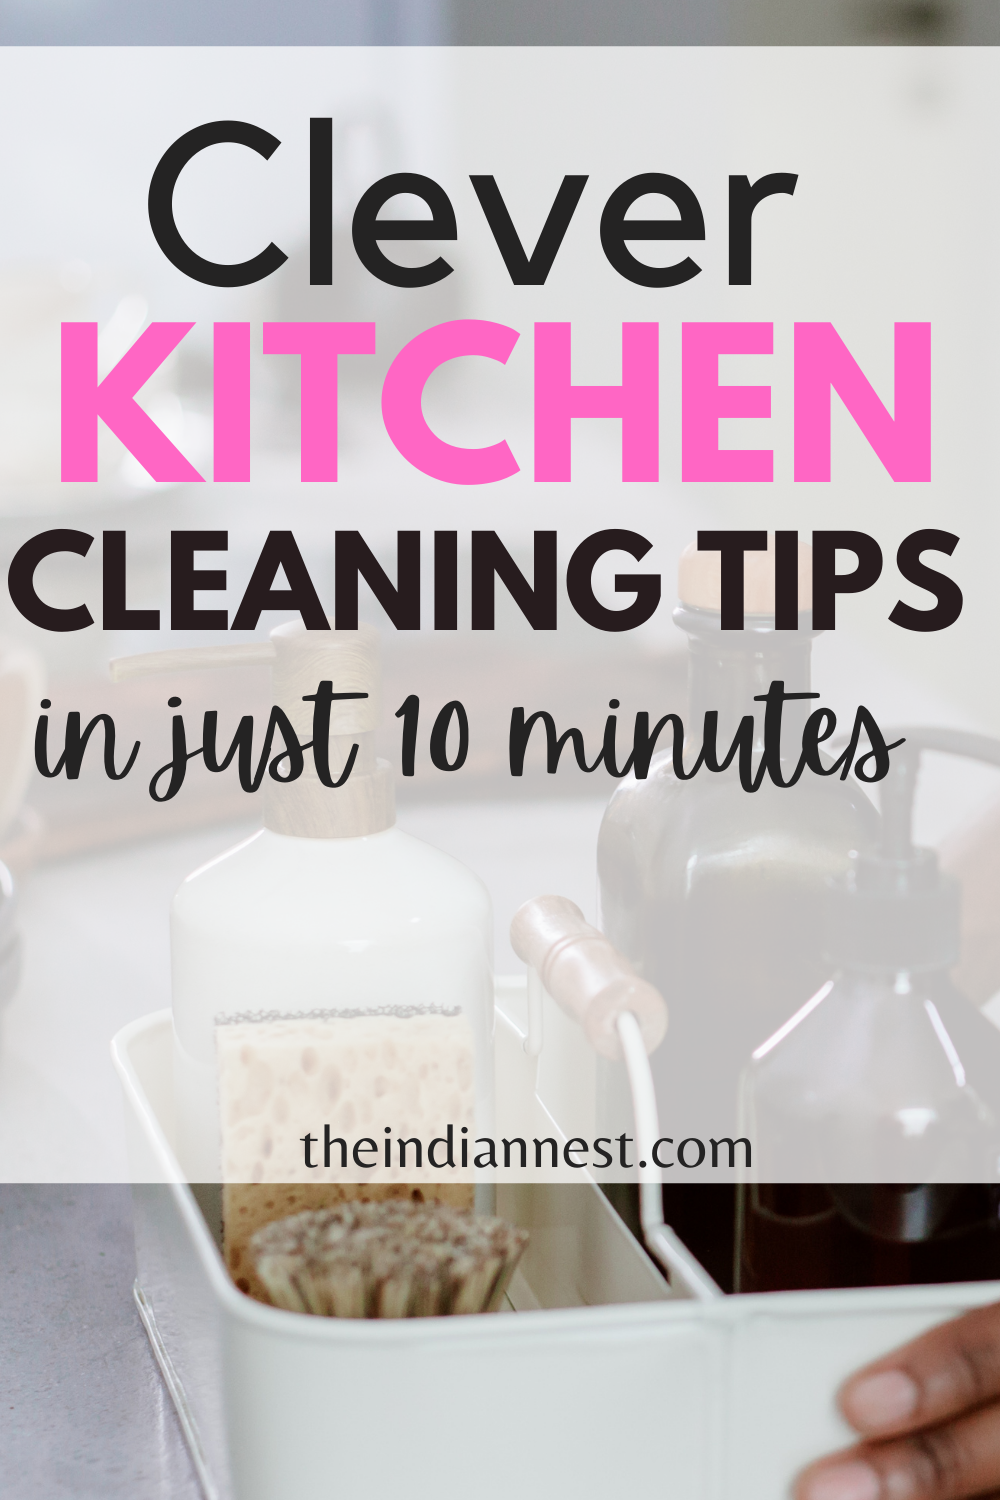 It sounds simple, and it is simple, but it can make a huge difference in your day. Quick 10 Minute Cleaning Routine For Your Kitchen. Get my tips for cleaning top to bottom in 10 minutes flat. Speed clean your kitchen in minutes with these easy tips and tricks.